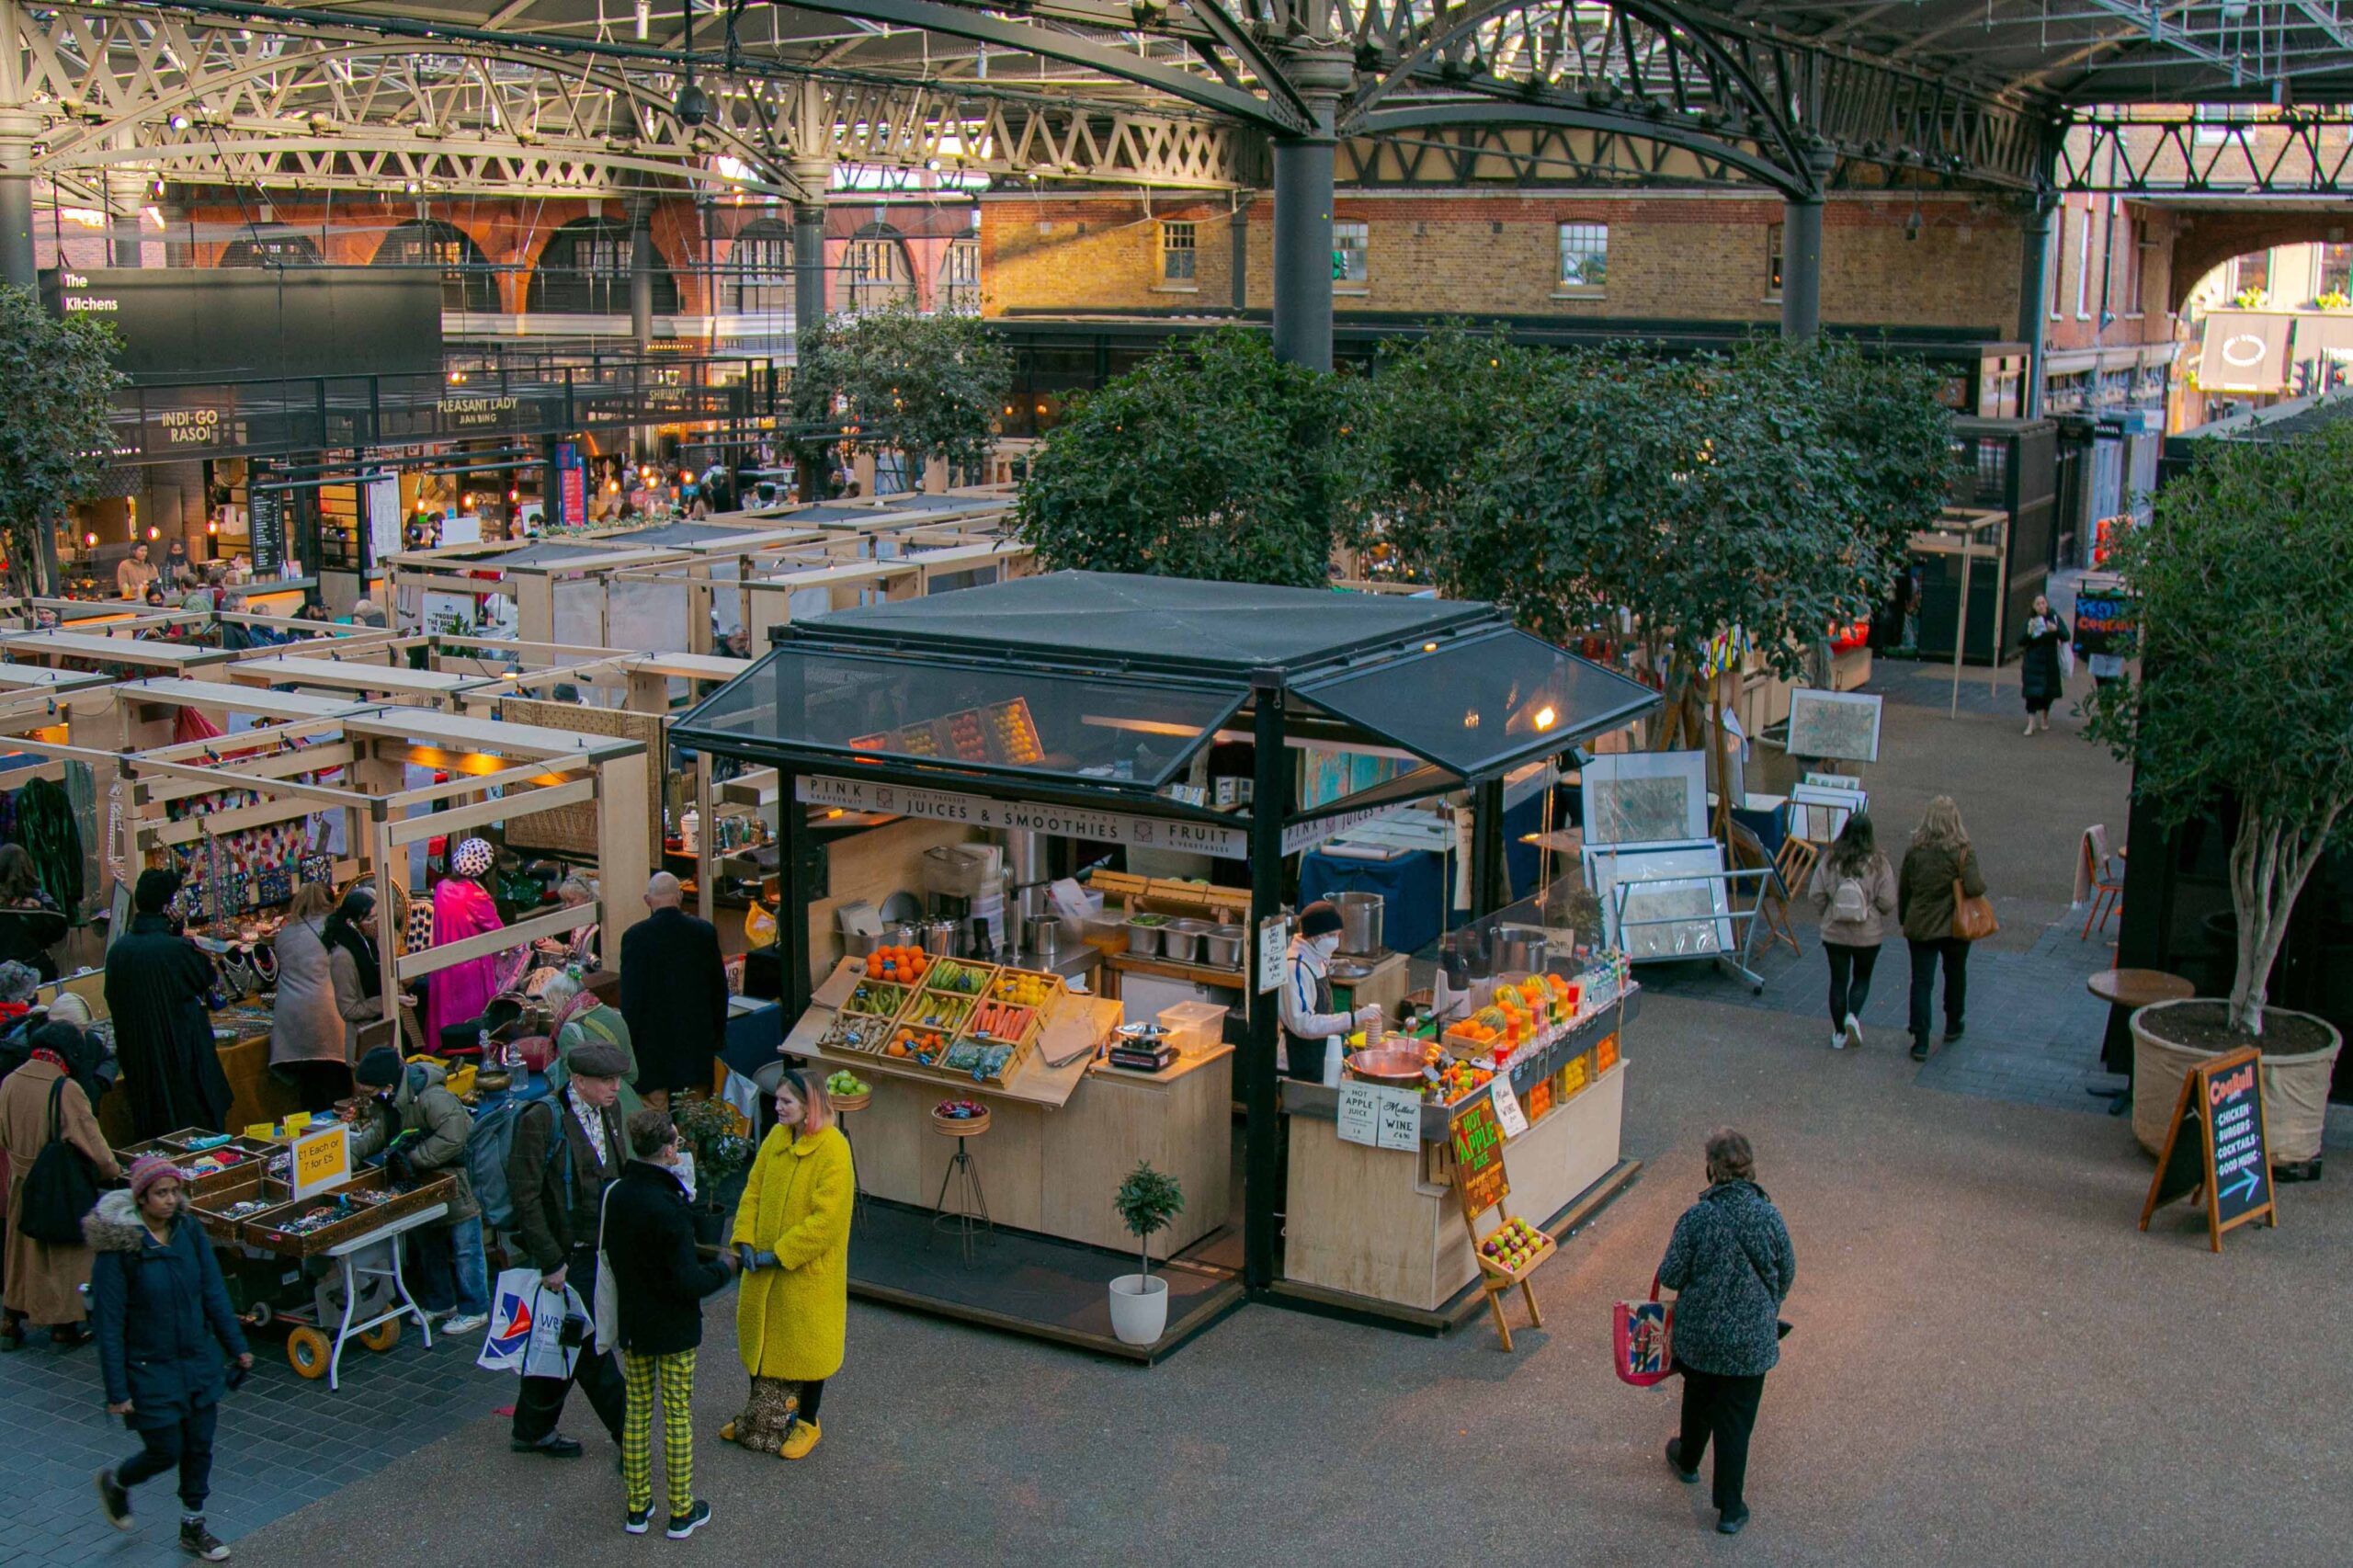 Best Independent Shopping Experiences - Spitalfields Market - large indoor market with many market stalls 